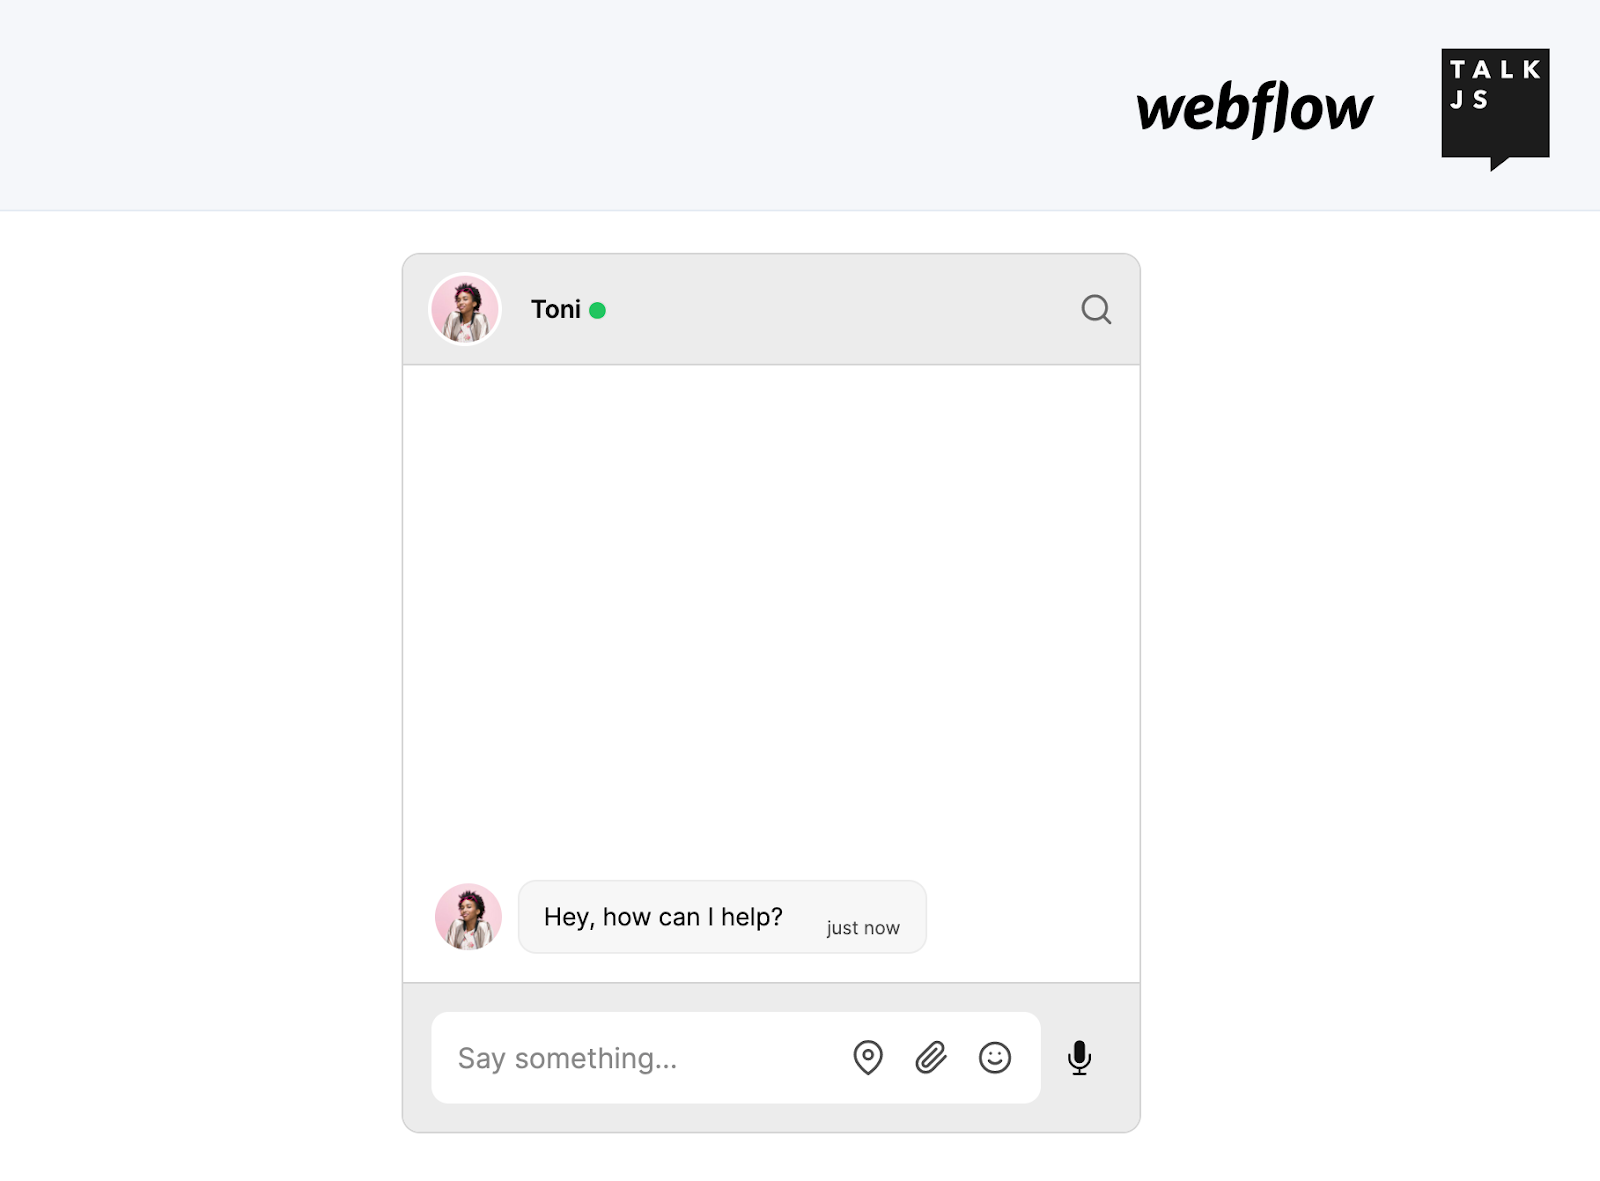 An empty Webflow site with at the center a TalkJS chat window with a person asking: ‘Hey, how can I help?’. At the top is a banner with a Webflow logo and a TalkJS logo.